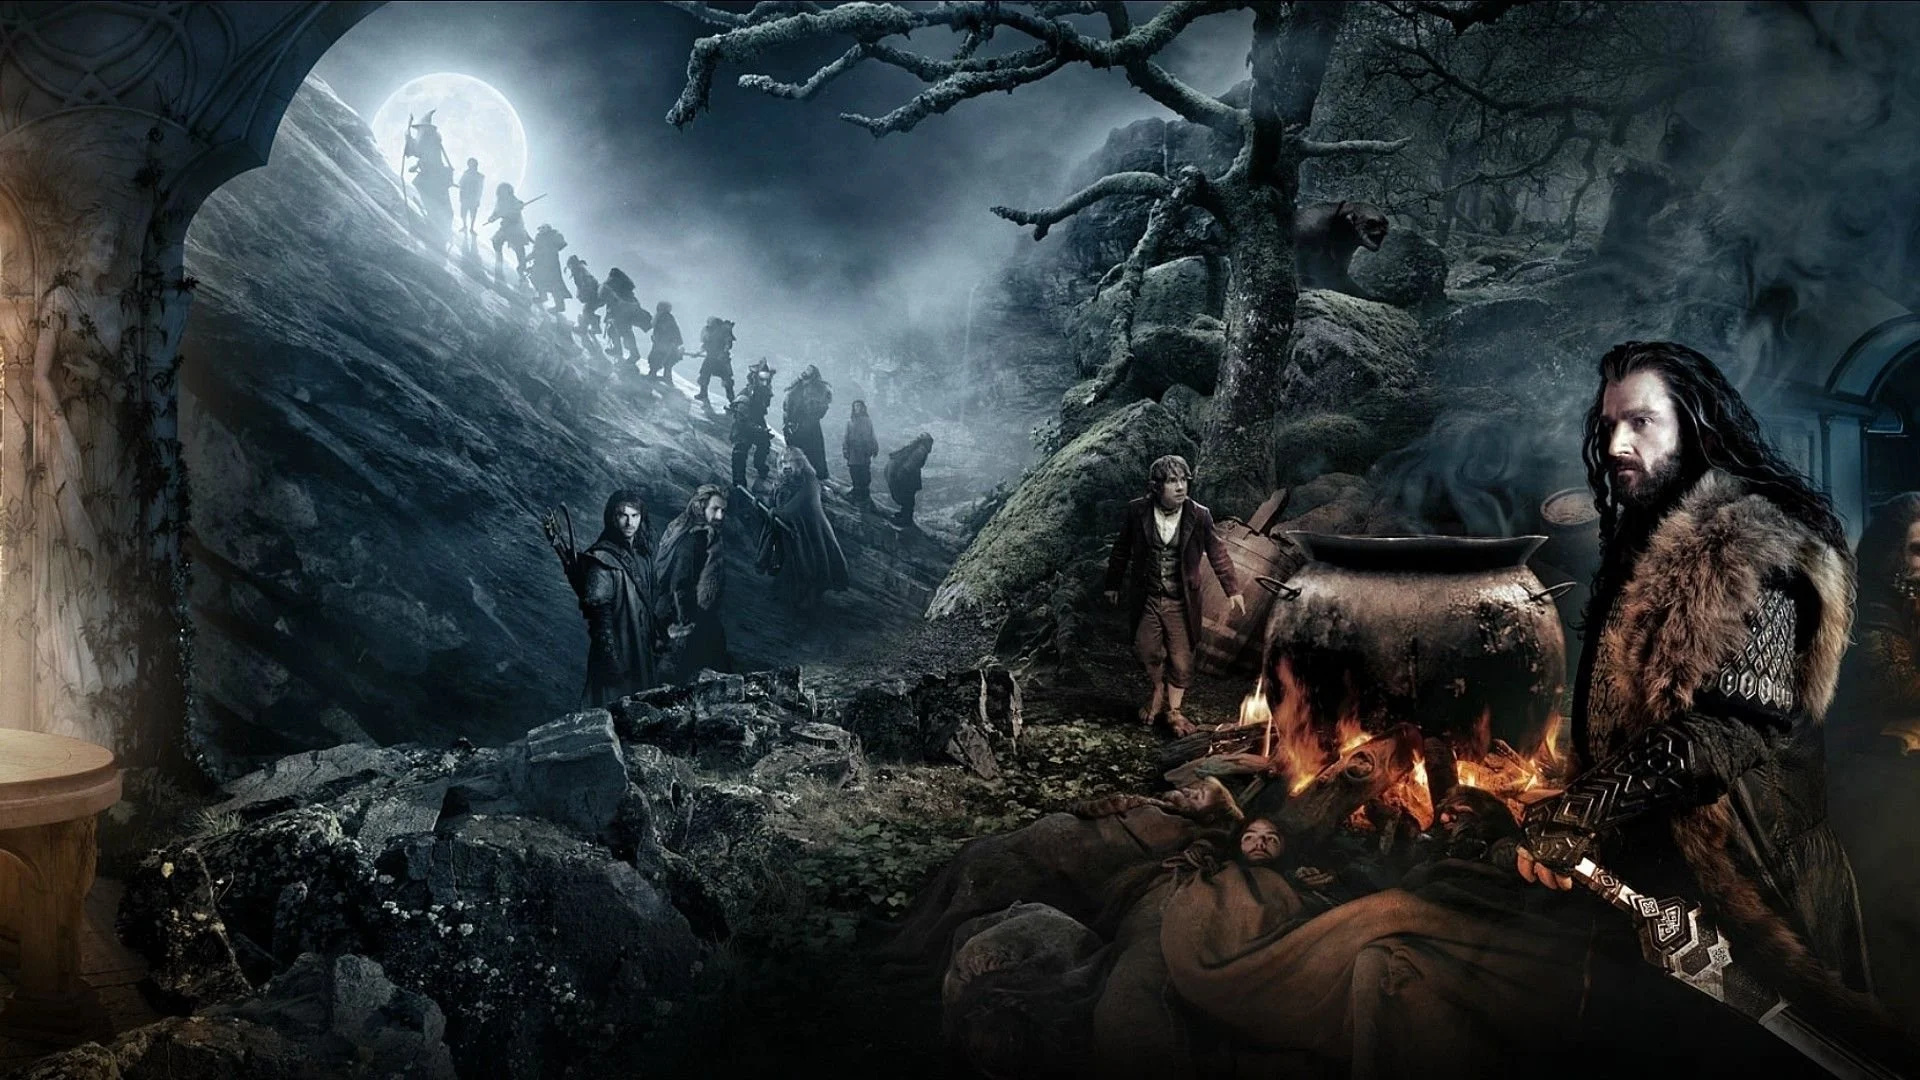 Dwarves (The Lord of the Rings): Thirteen men, led by Thorin Oakenshield, on a quest to reclaim the Lonely Mountain. 1920x1080 Full HD Wallpaper.